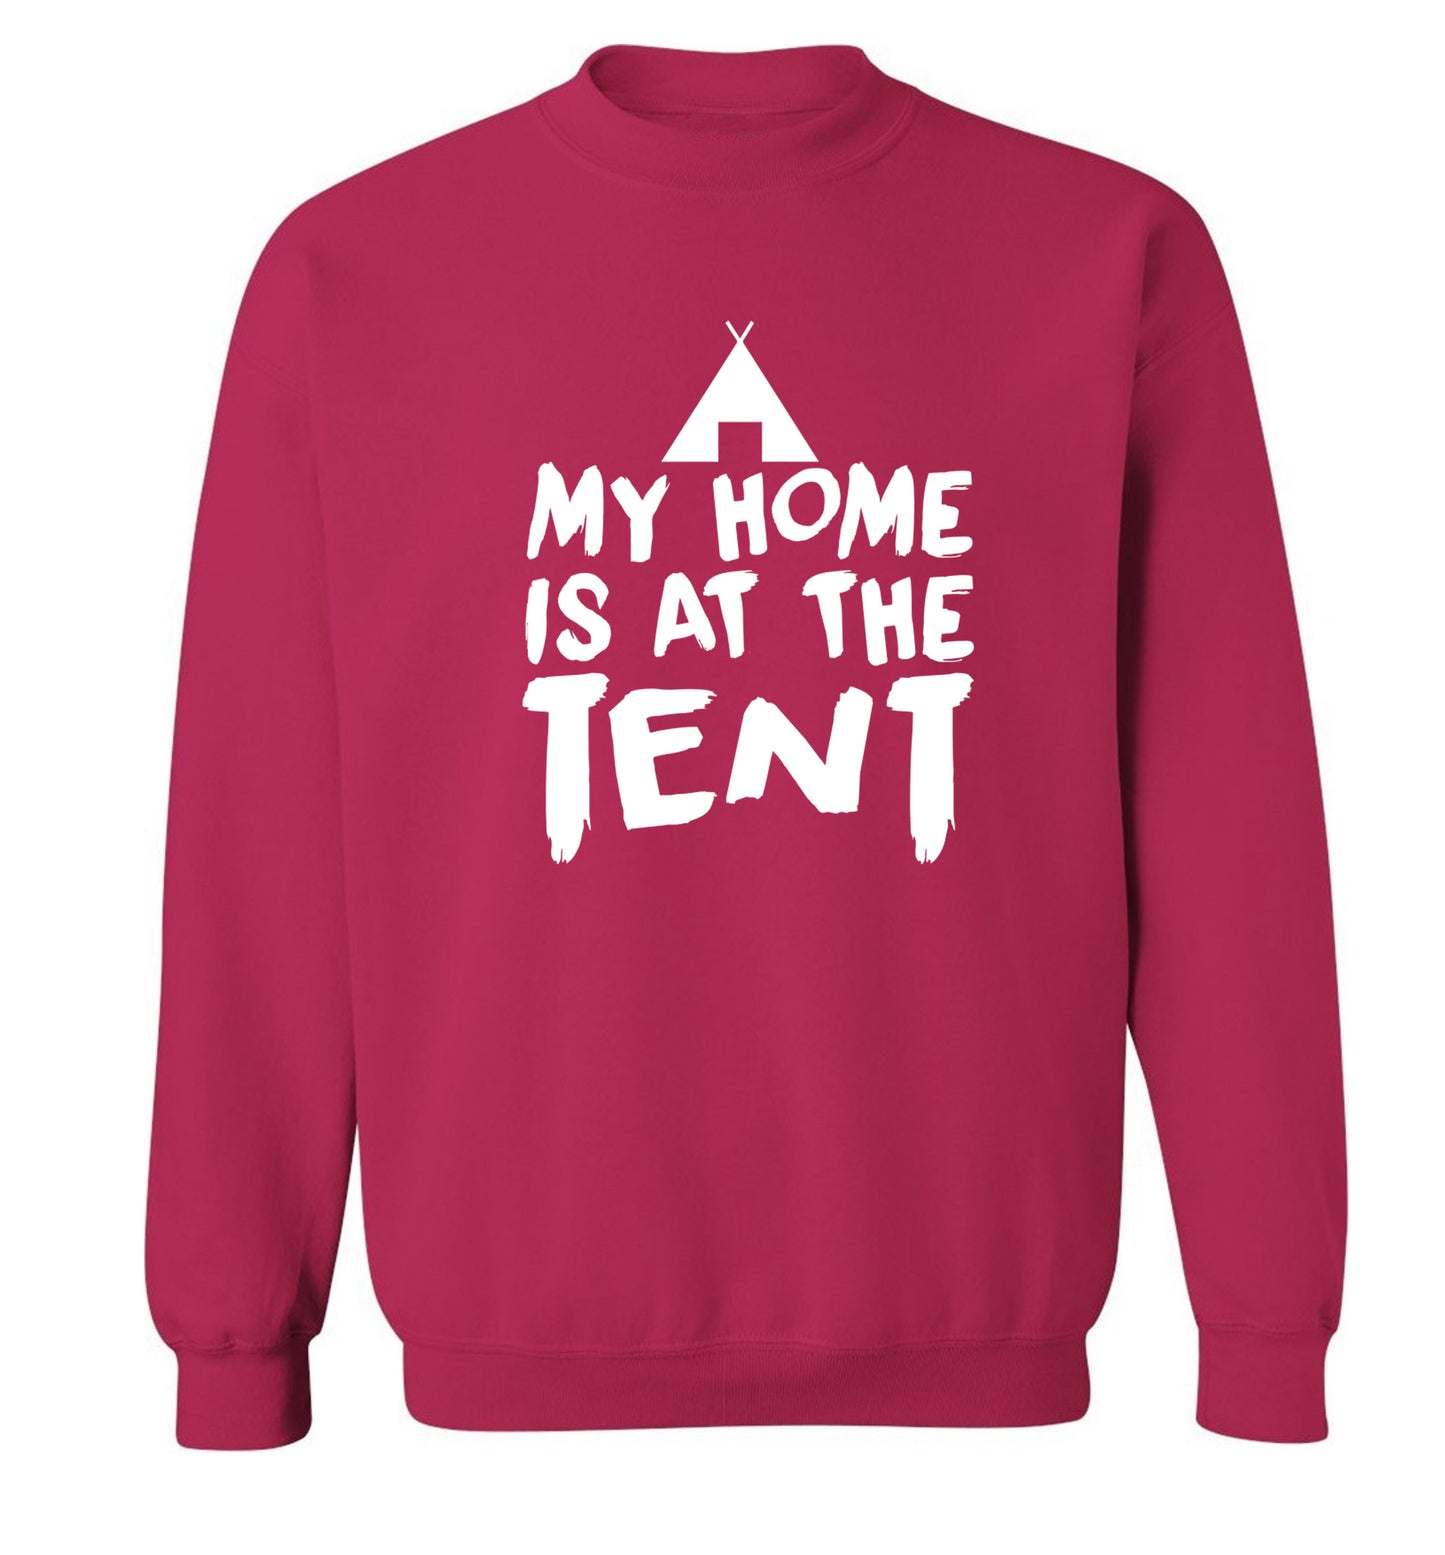 My home is at the tent Adult's unisex pink Sweater 2XL